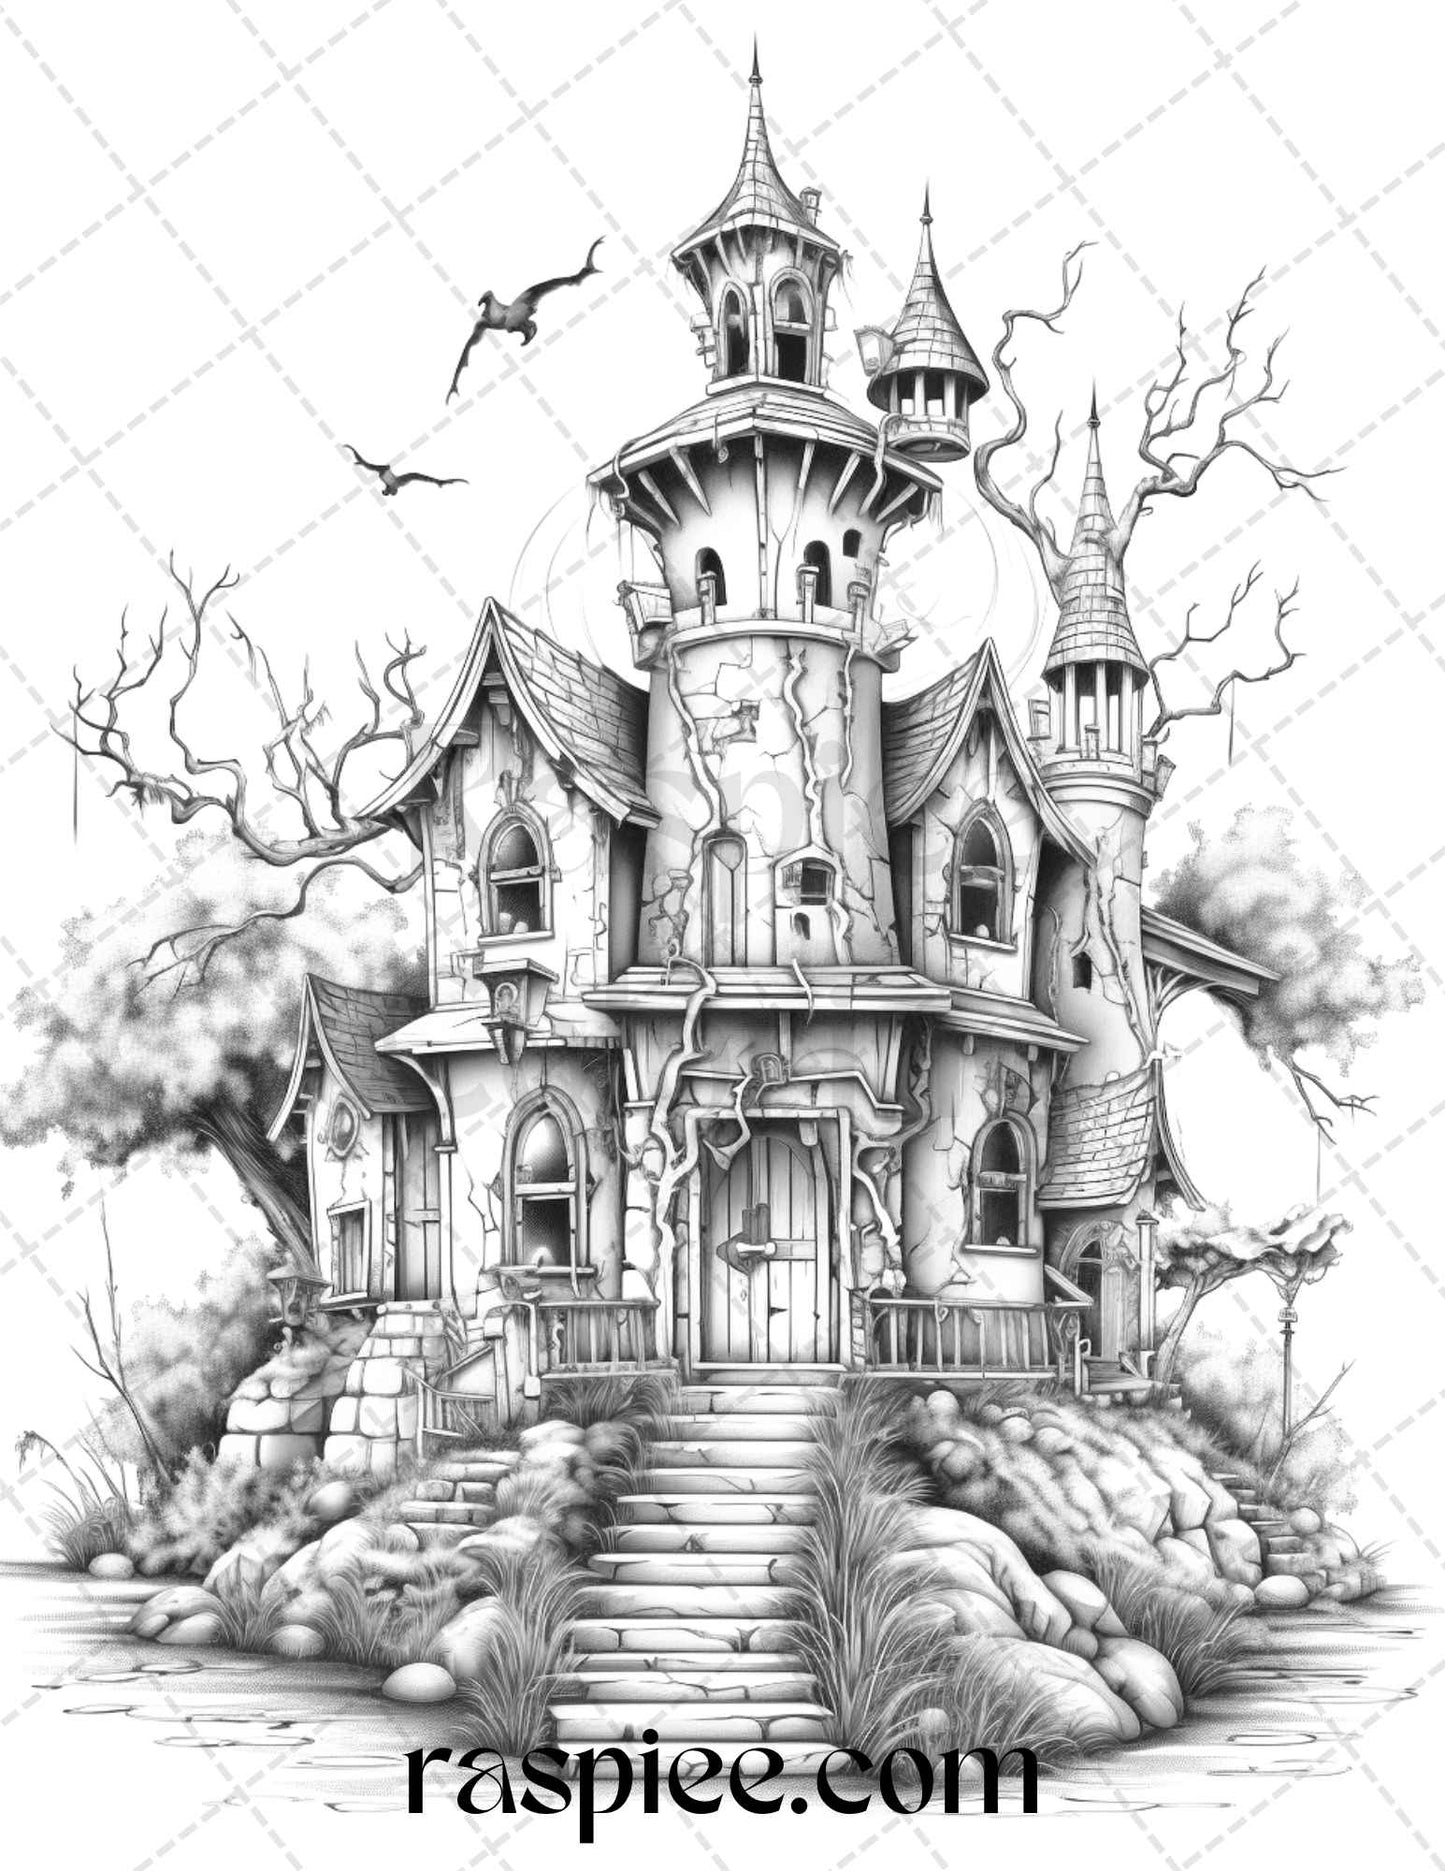 50 Haunted Castles Grayscale Coloring Pages Printable, Halloween Coloring Book, PDF File Instant Download - raspiee